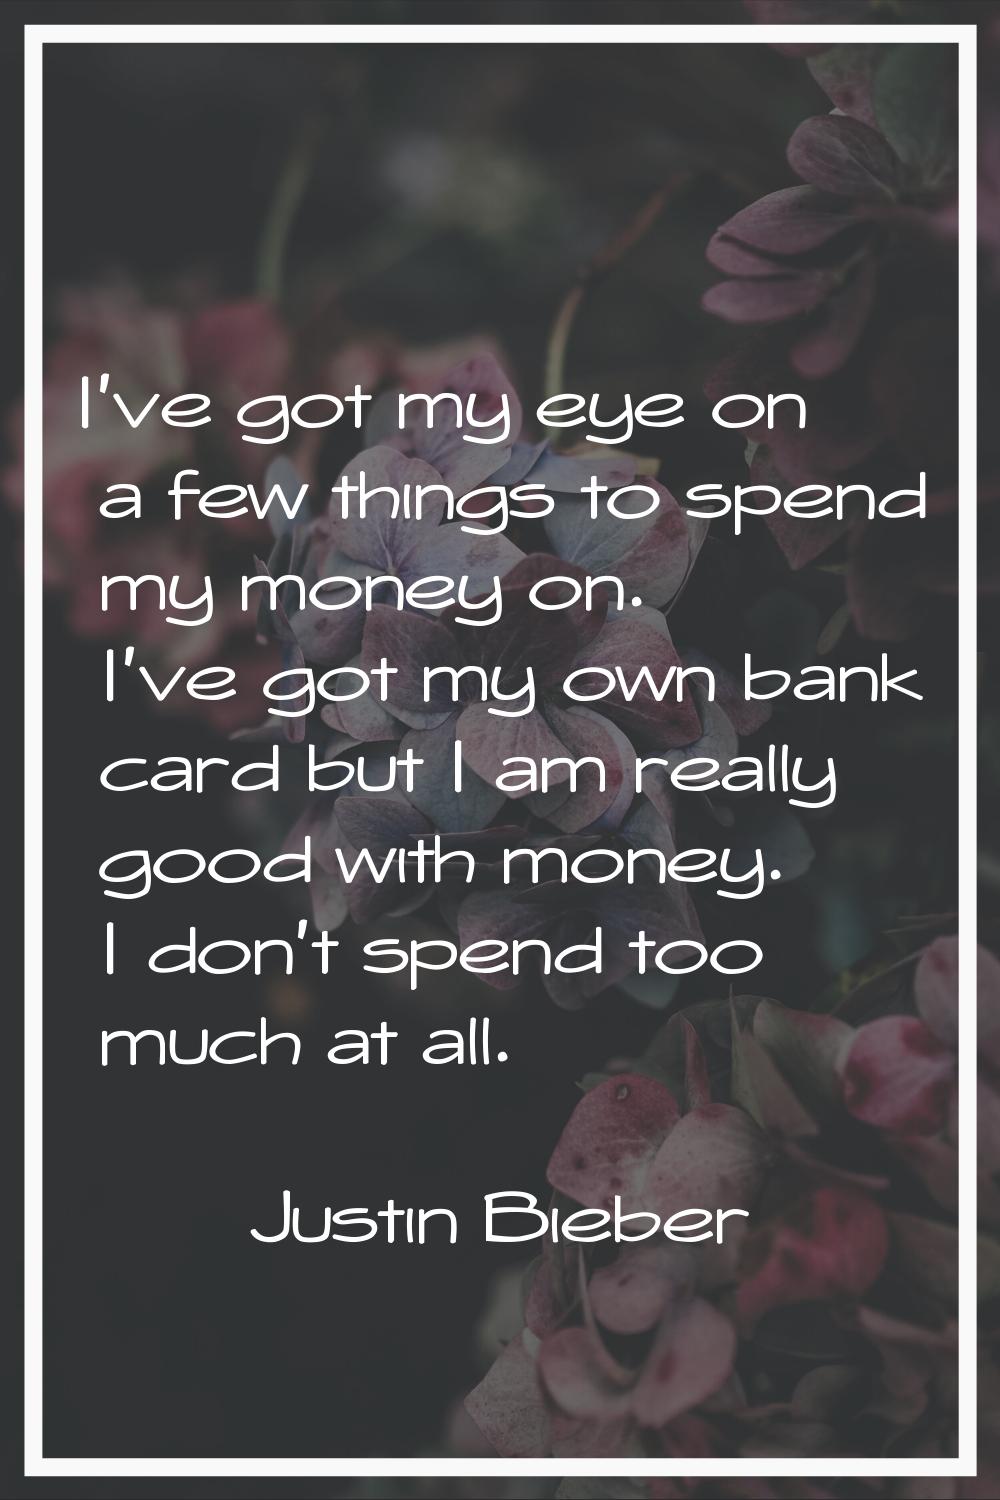 I've got my eye on a few things to spend my money on. I've got my own bank card but I am really goo